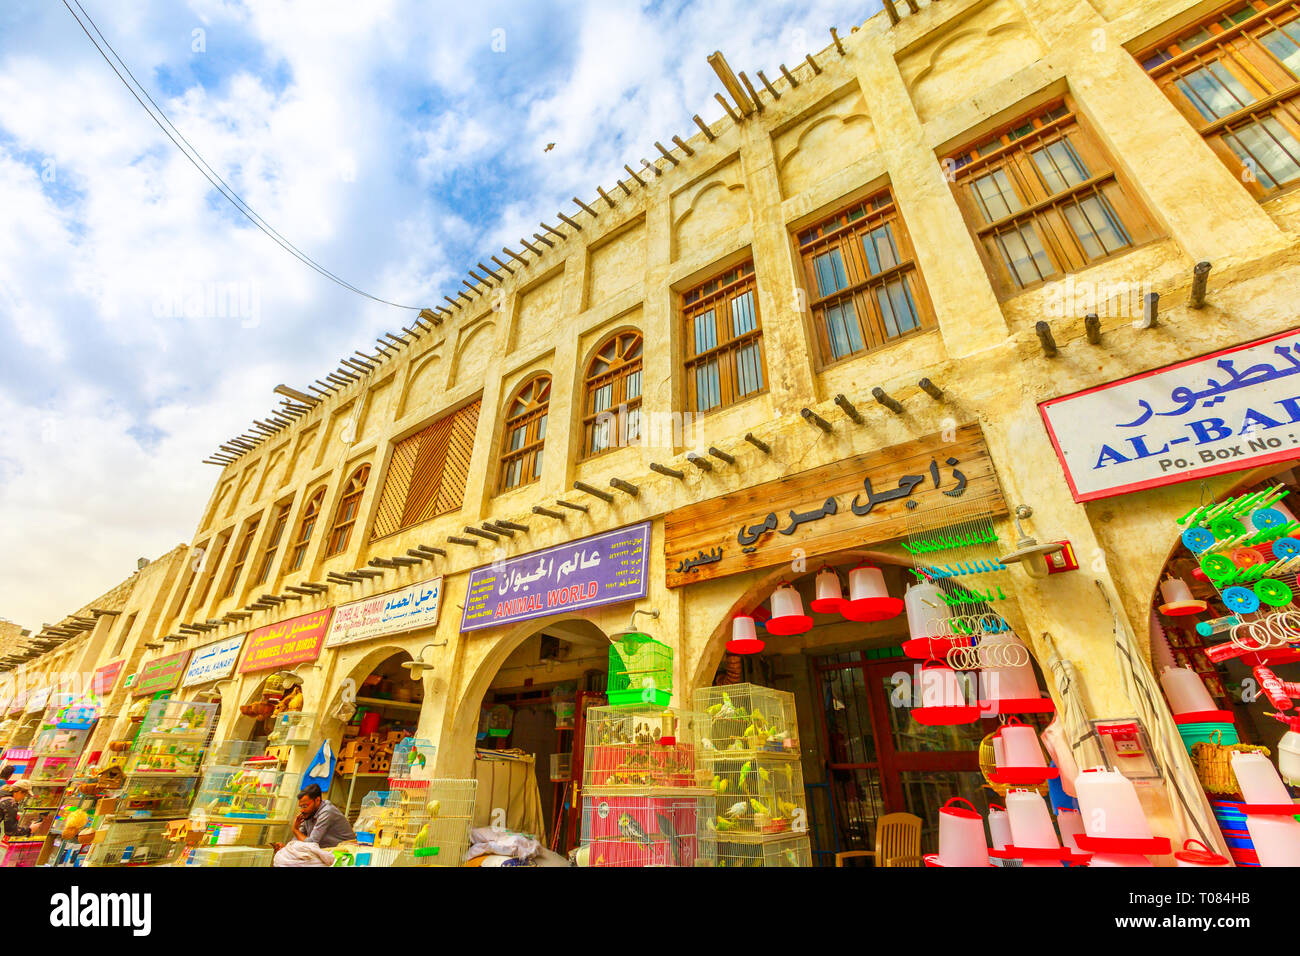 Doha, Qatar - February 19, 2019: bottom view of pet shop along pedestrian road inside Bird Souq, the animal market and popular tourist attraction in Stock Photo